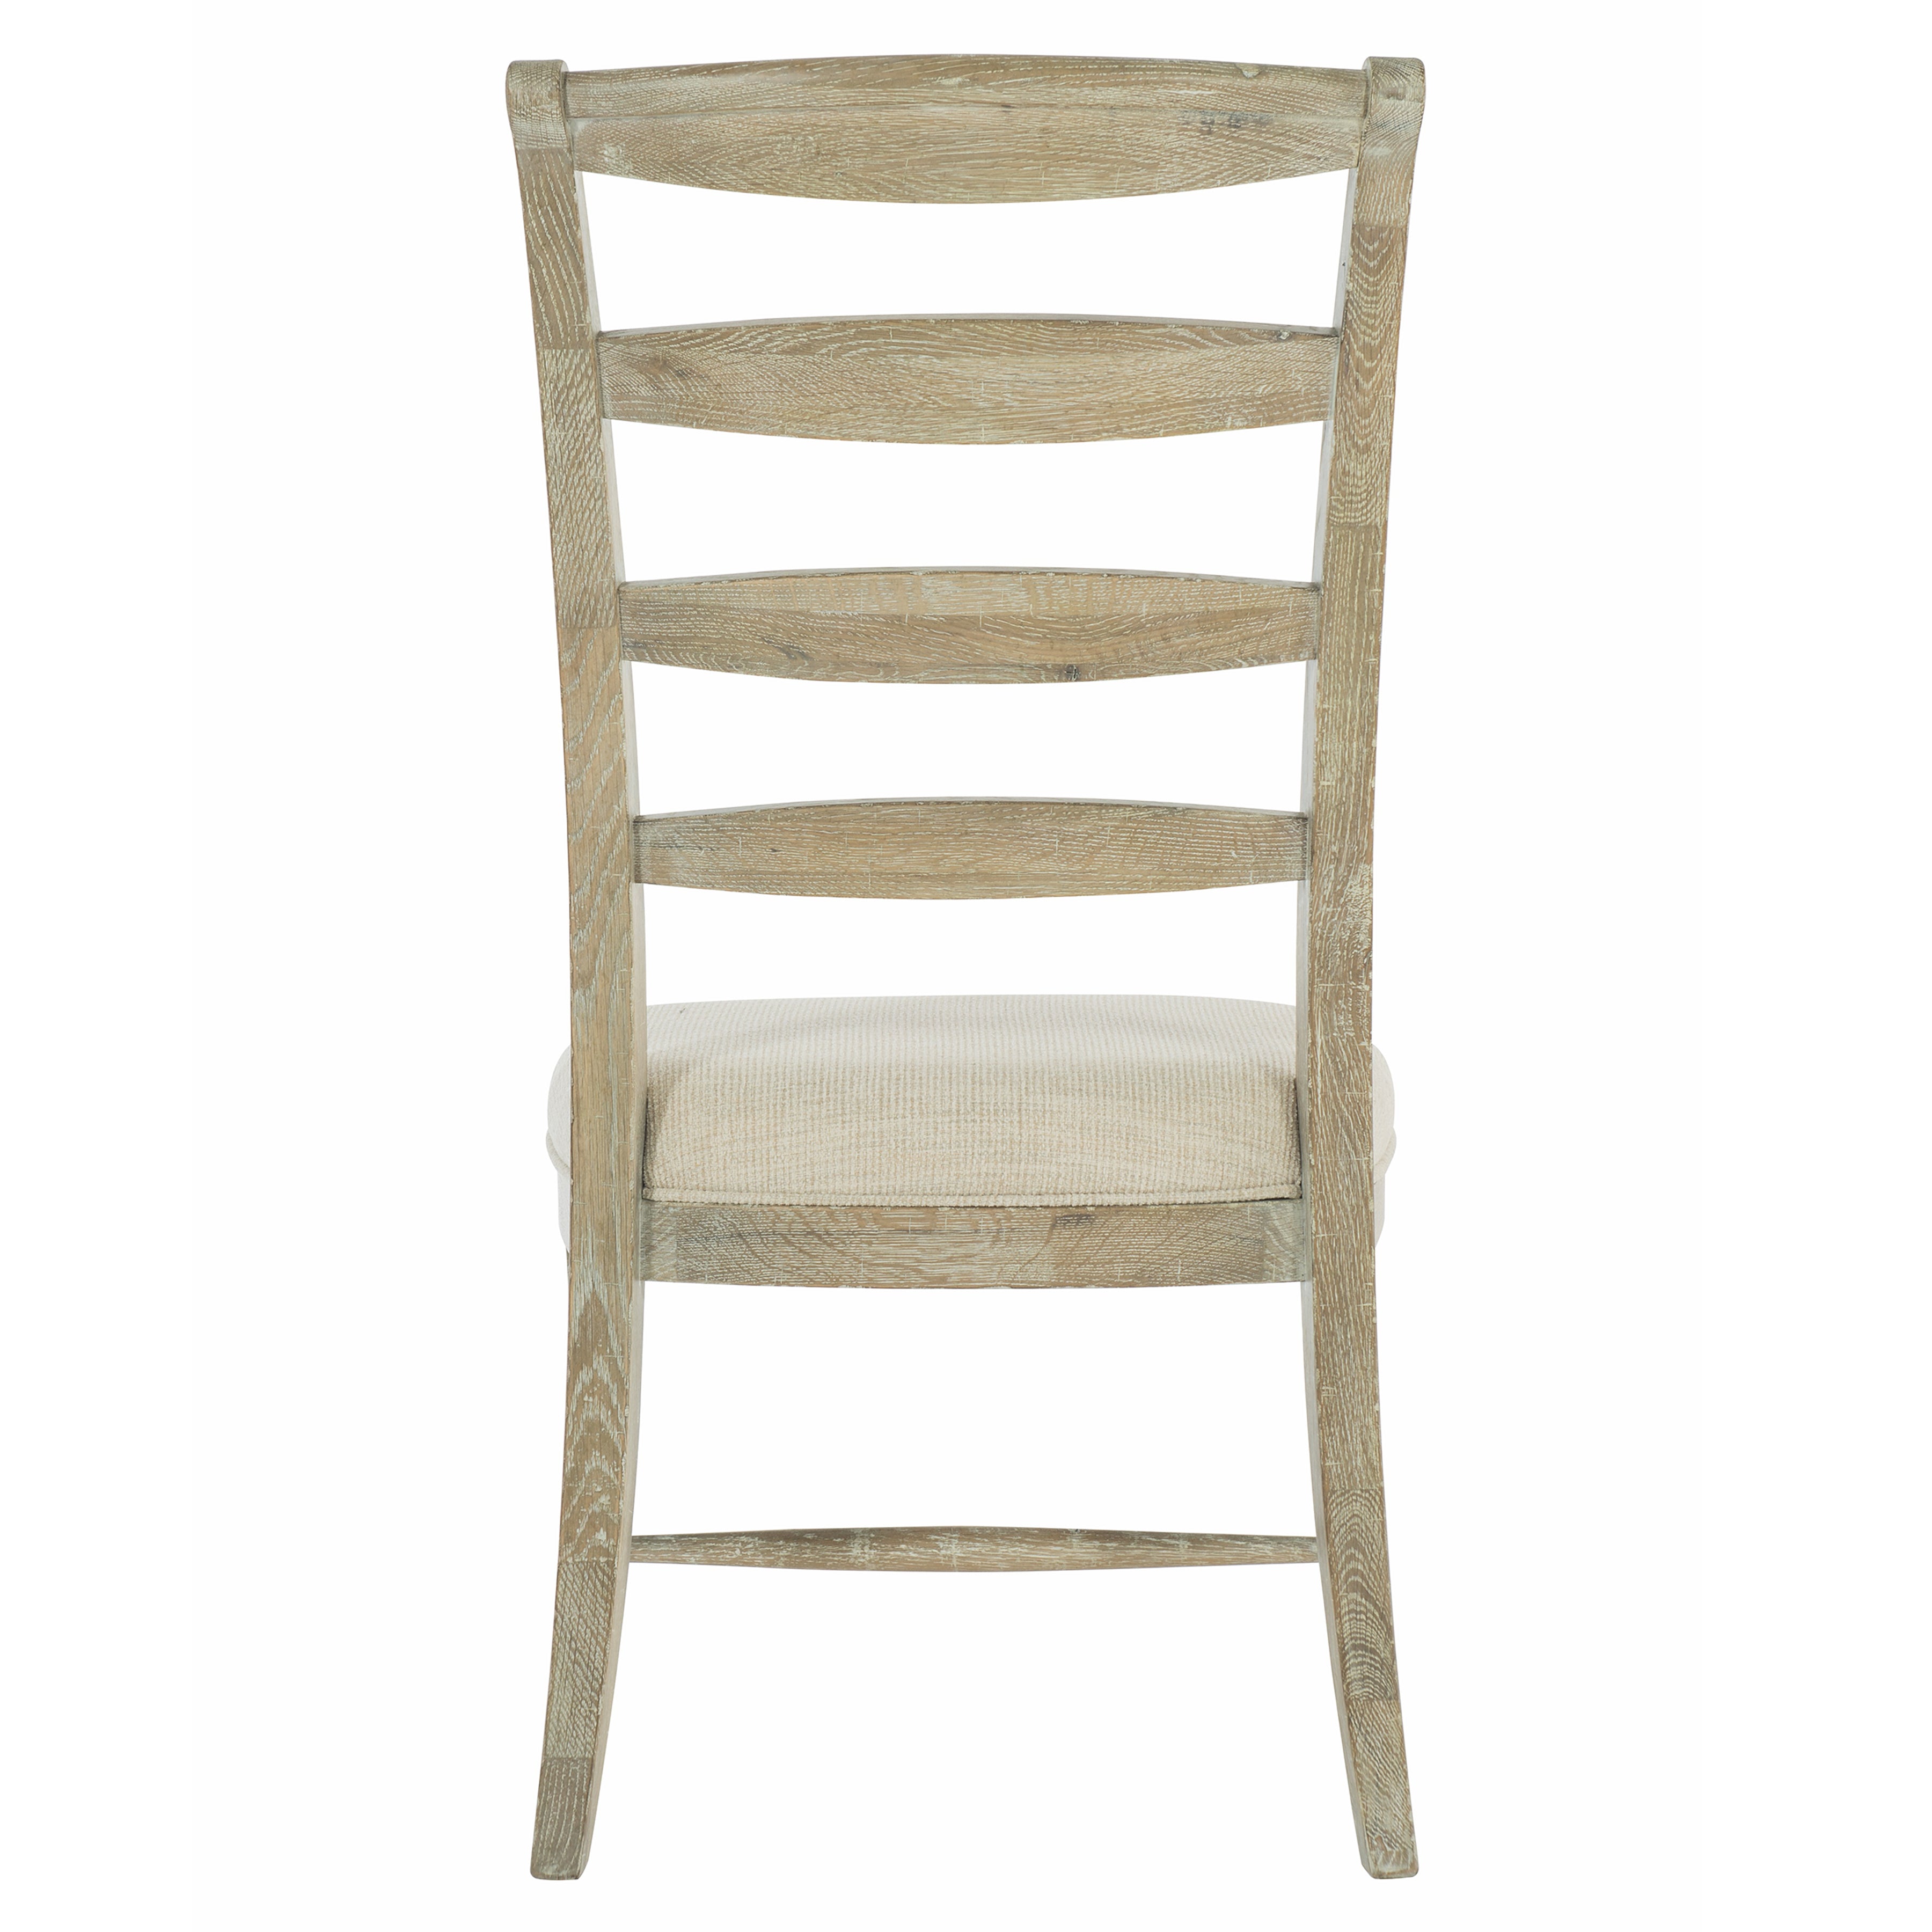 Rustic Patina Ladderback Side Chair in Sand Finish